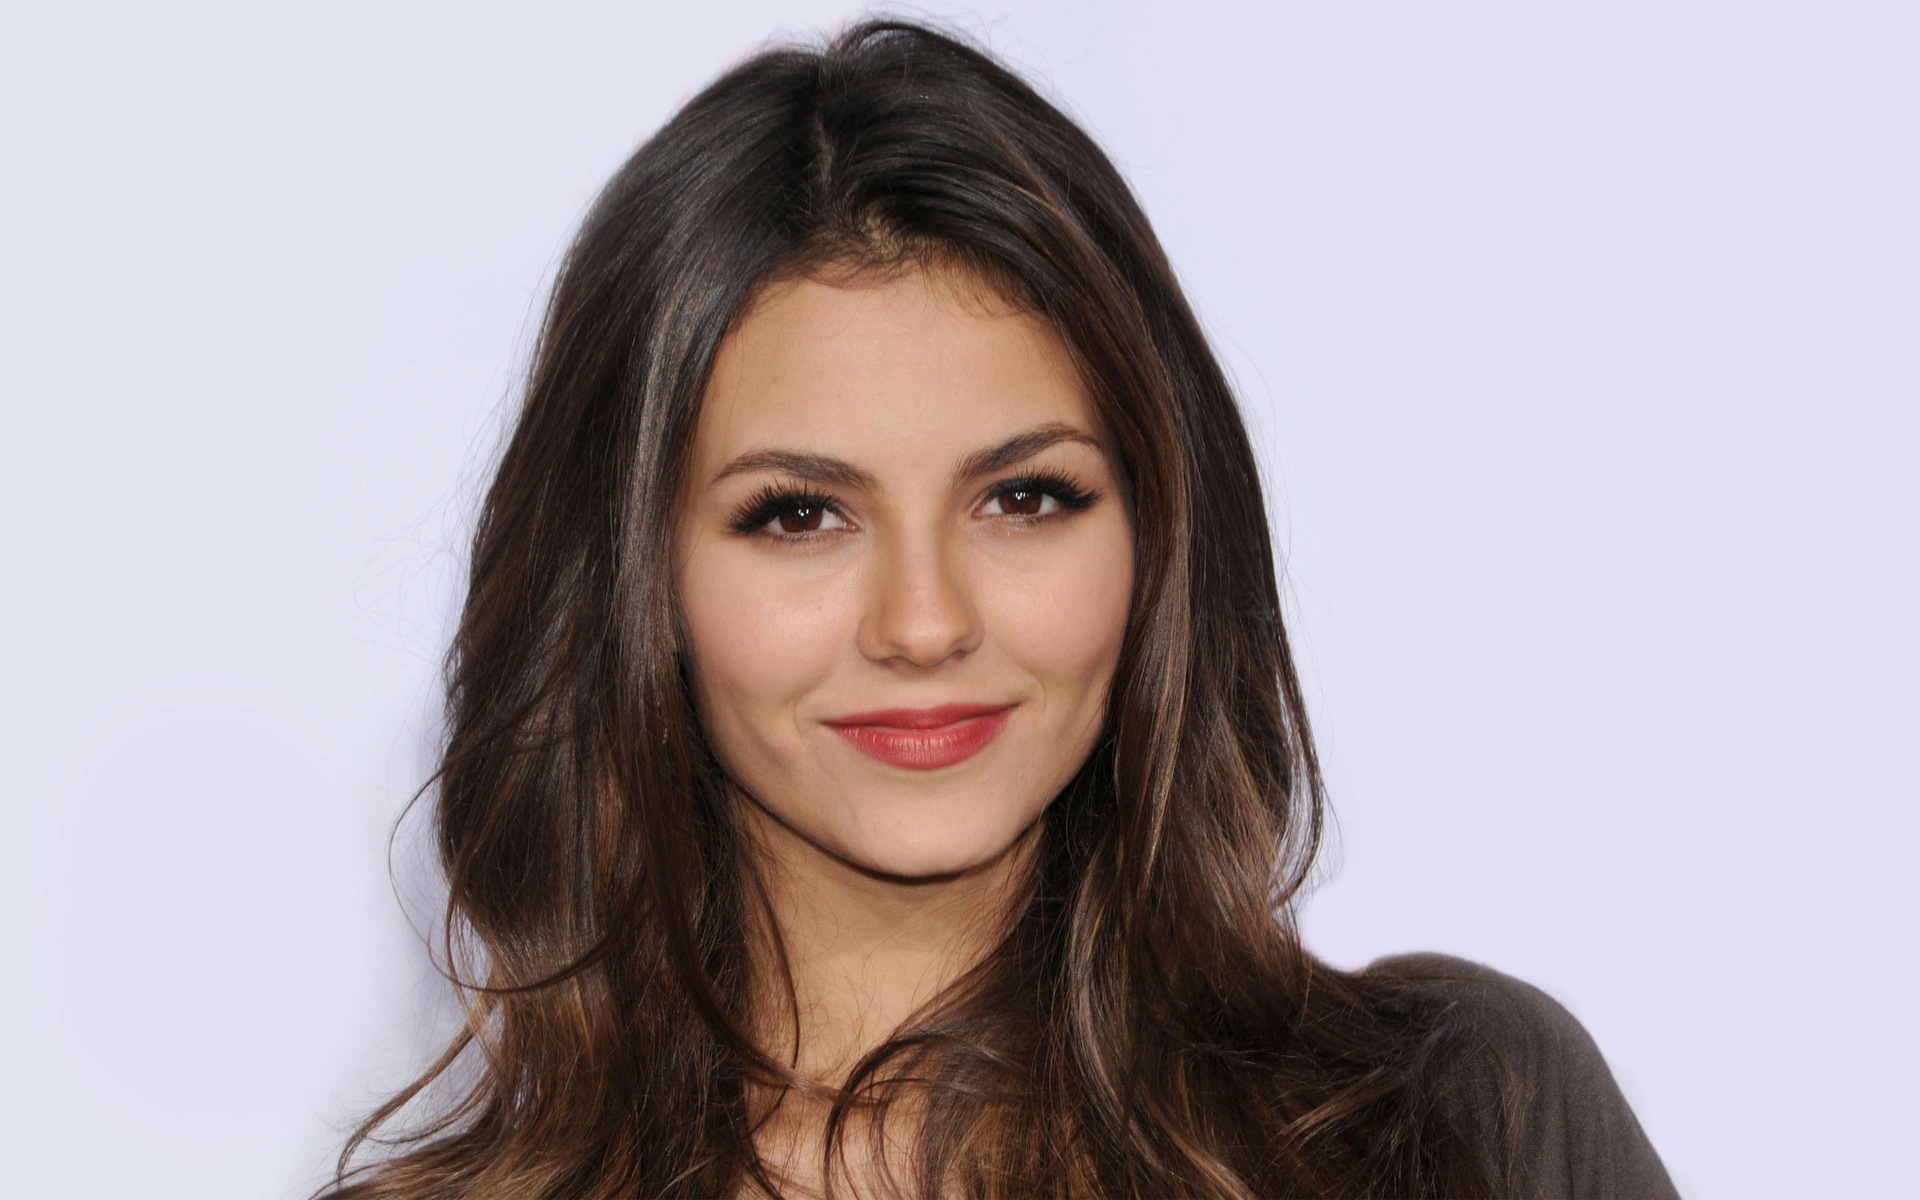 Victoria Justice beautiful wallpapers #26 - 1920x1200